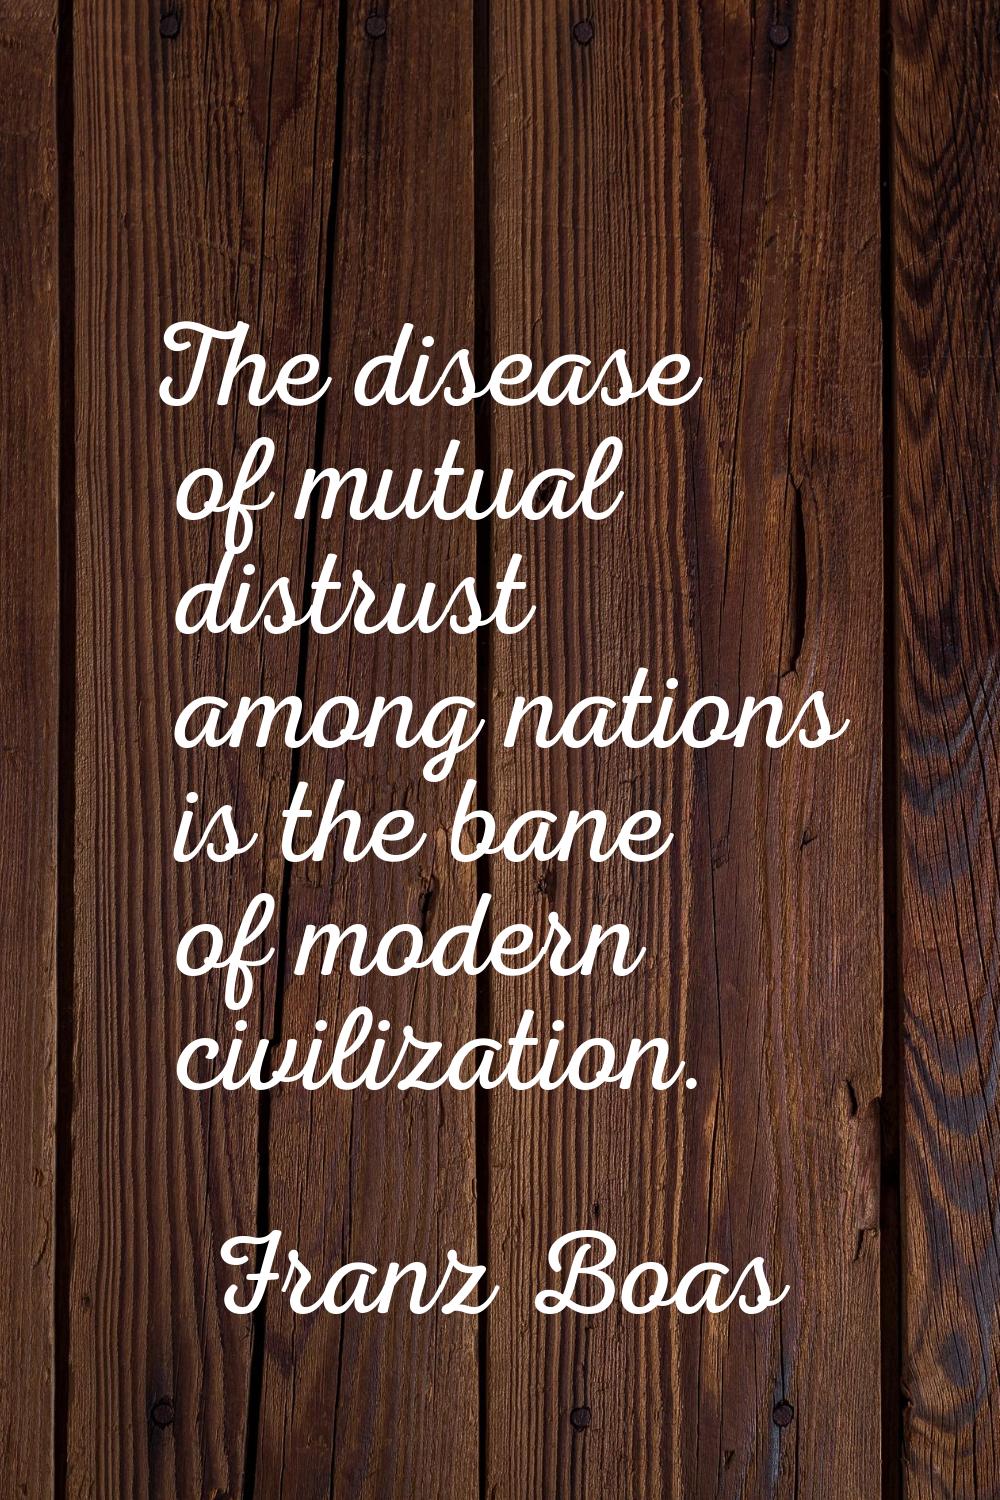 The disease of mutual distrust among nations is the bane of modern civilization.